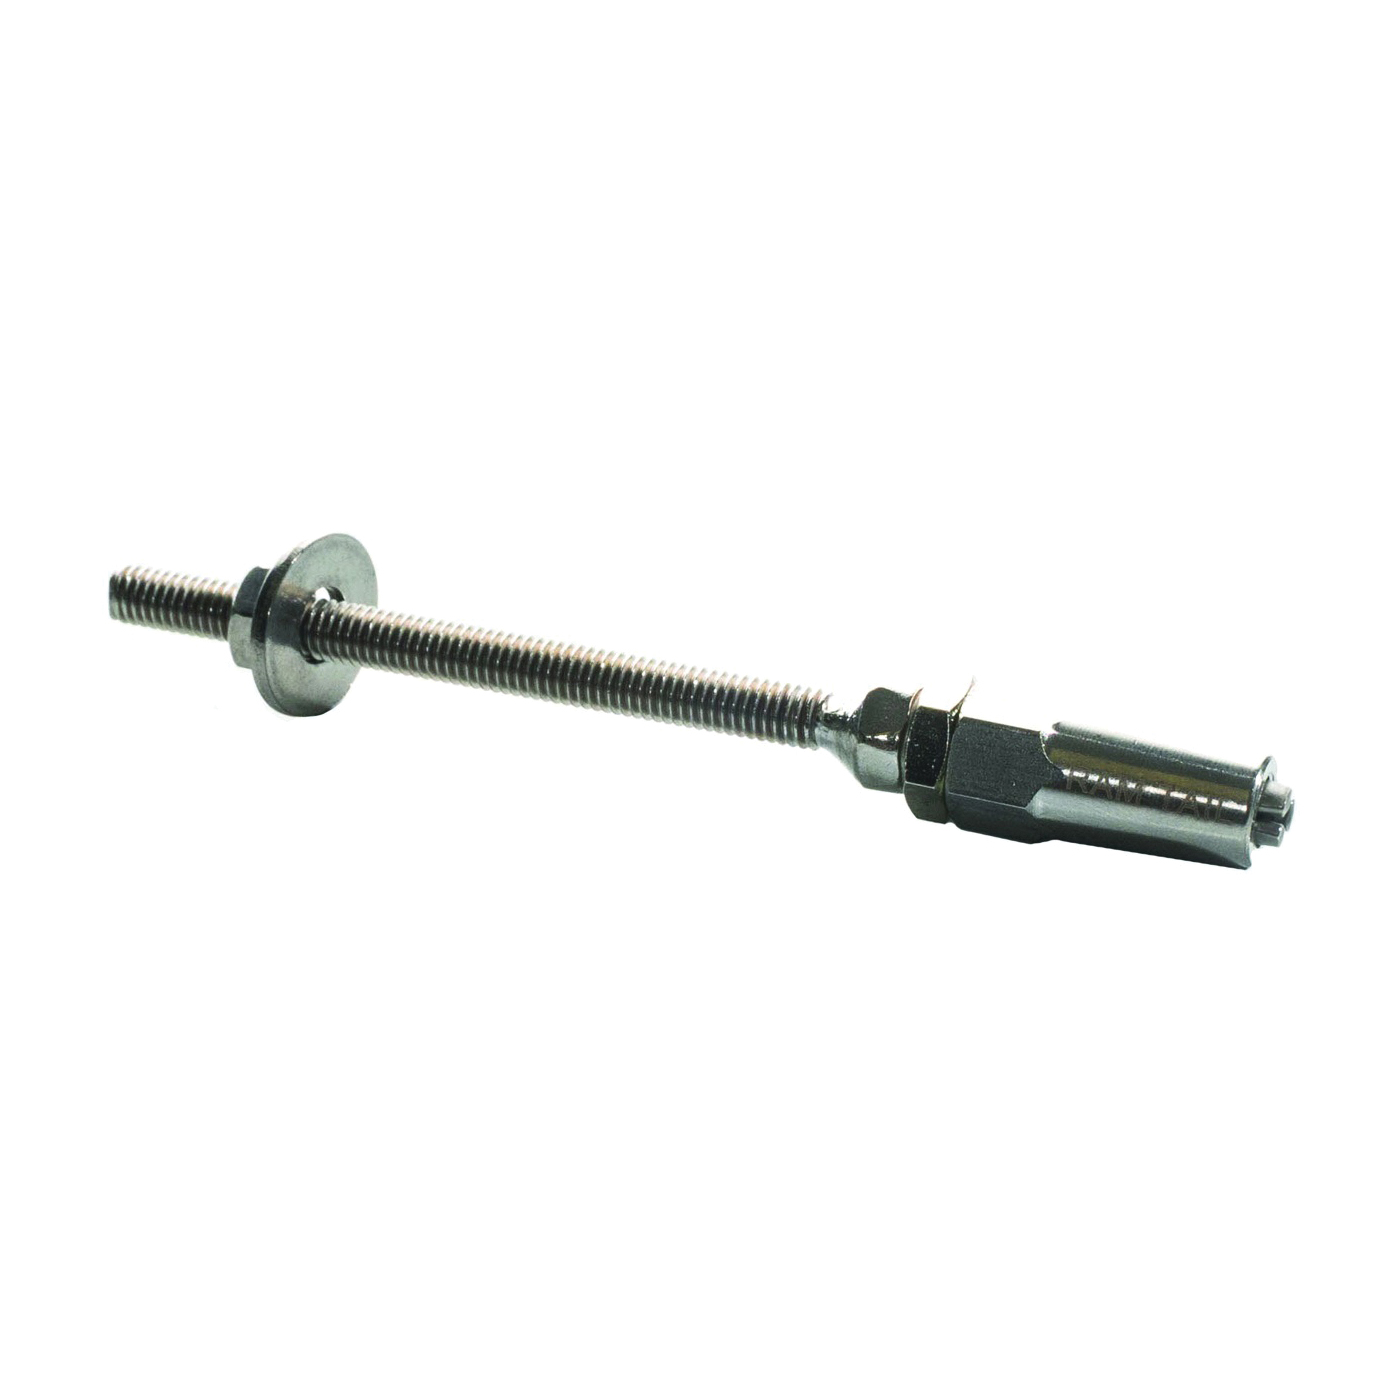 RT TJ-75 Threaded Jaw, Stainless Steel